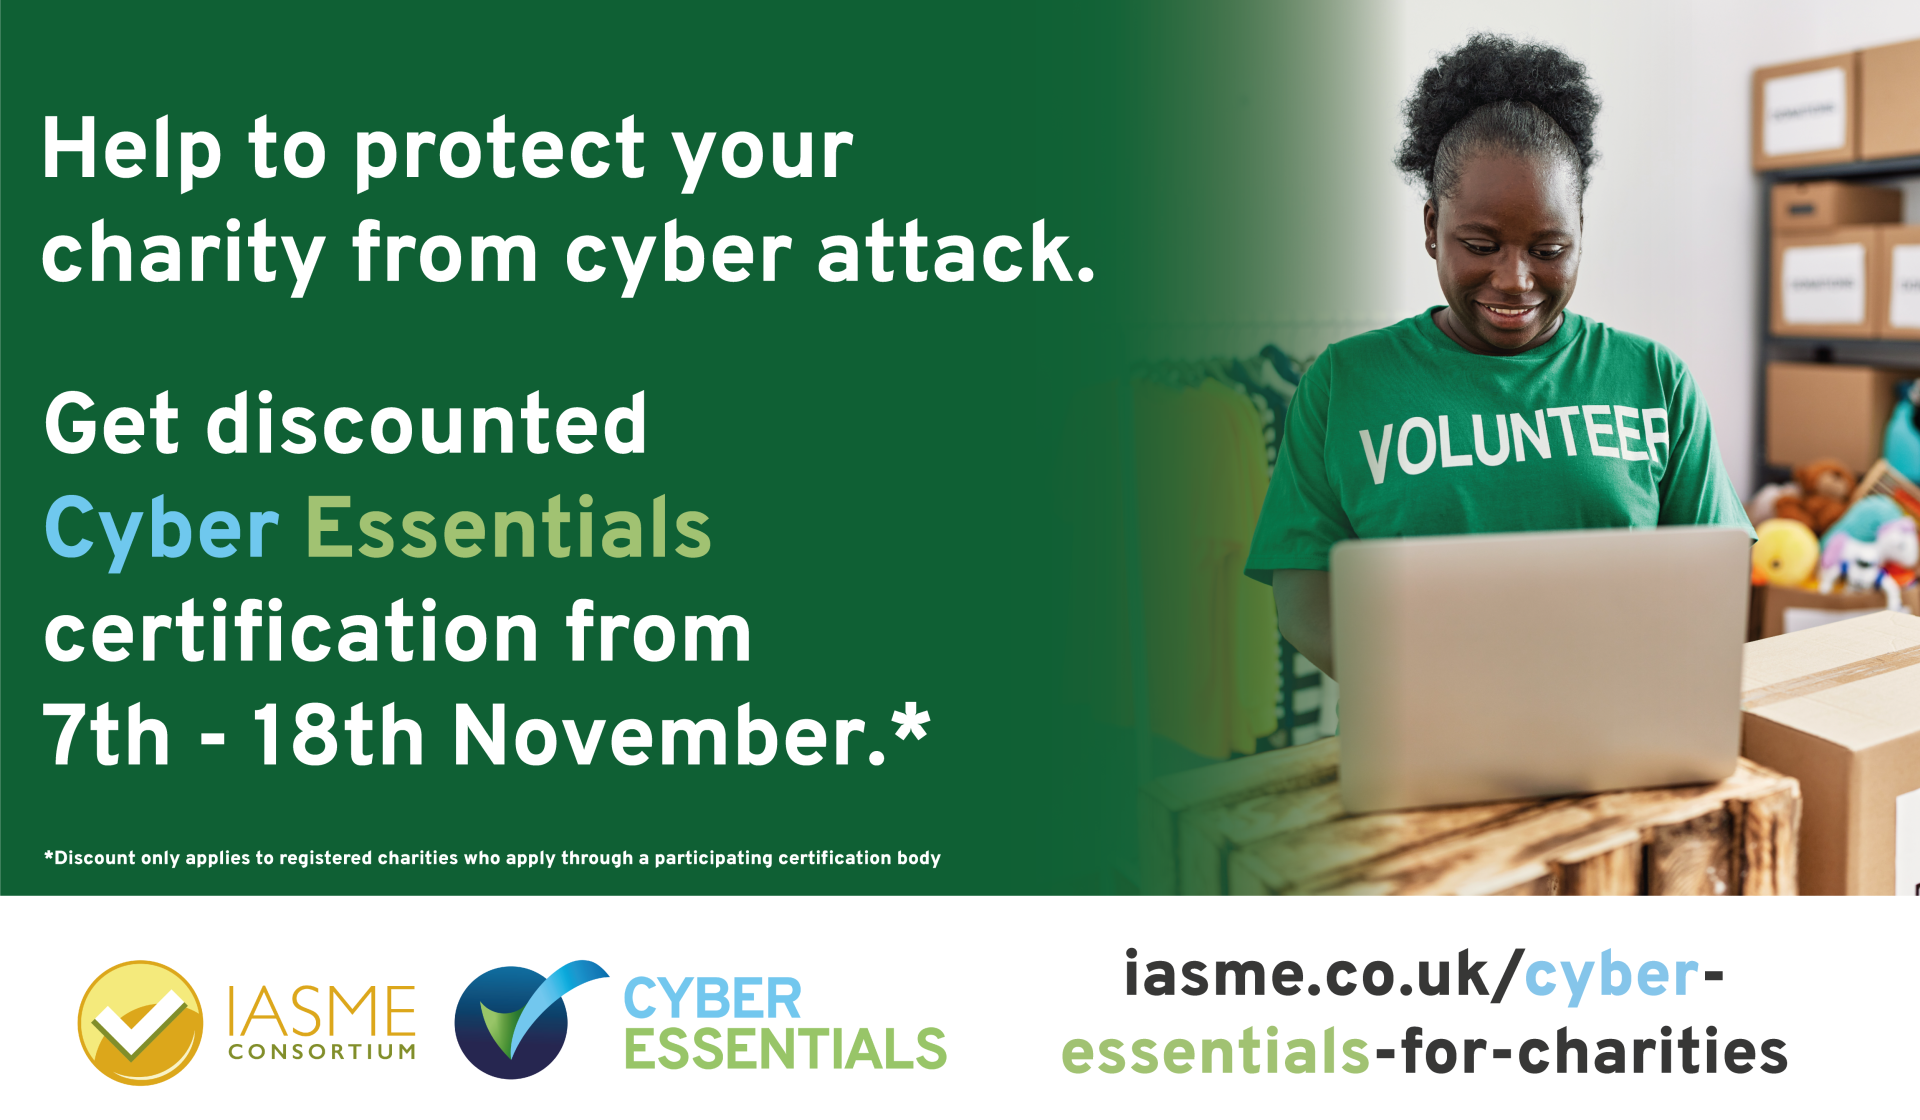 IASME working with the National Cyber Security Centre to educate charities about Cyber Security